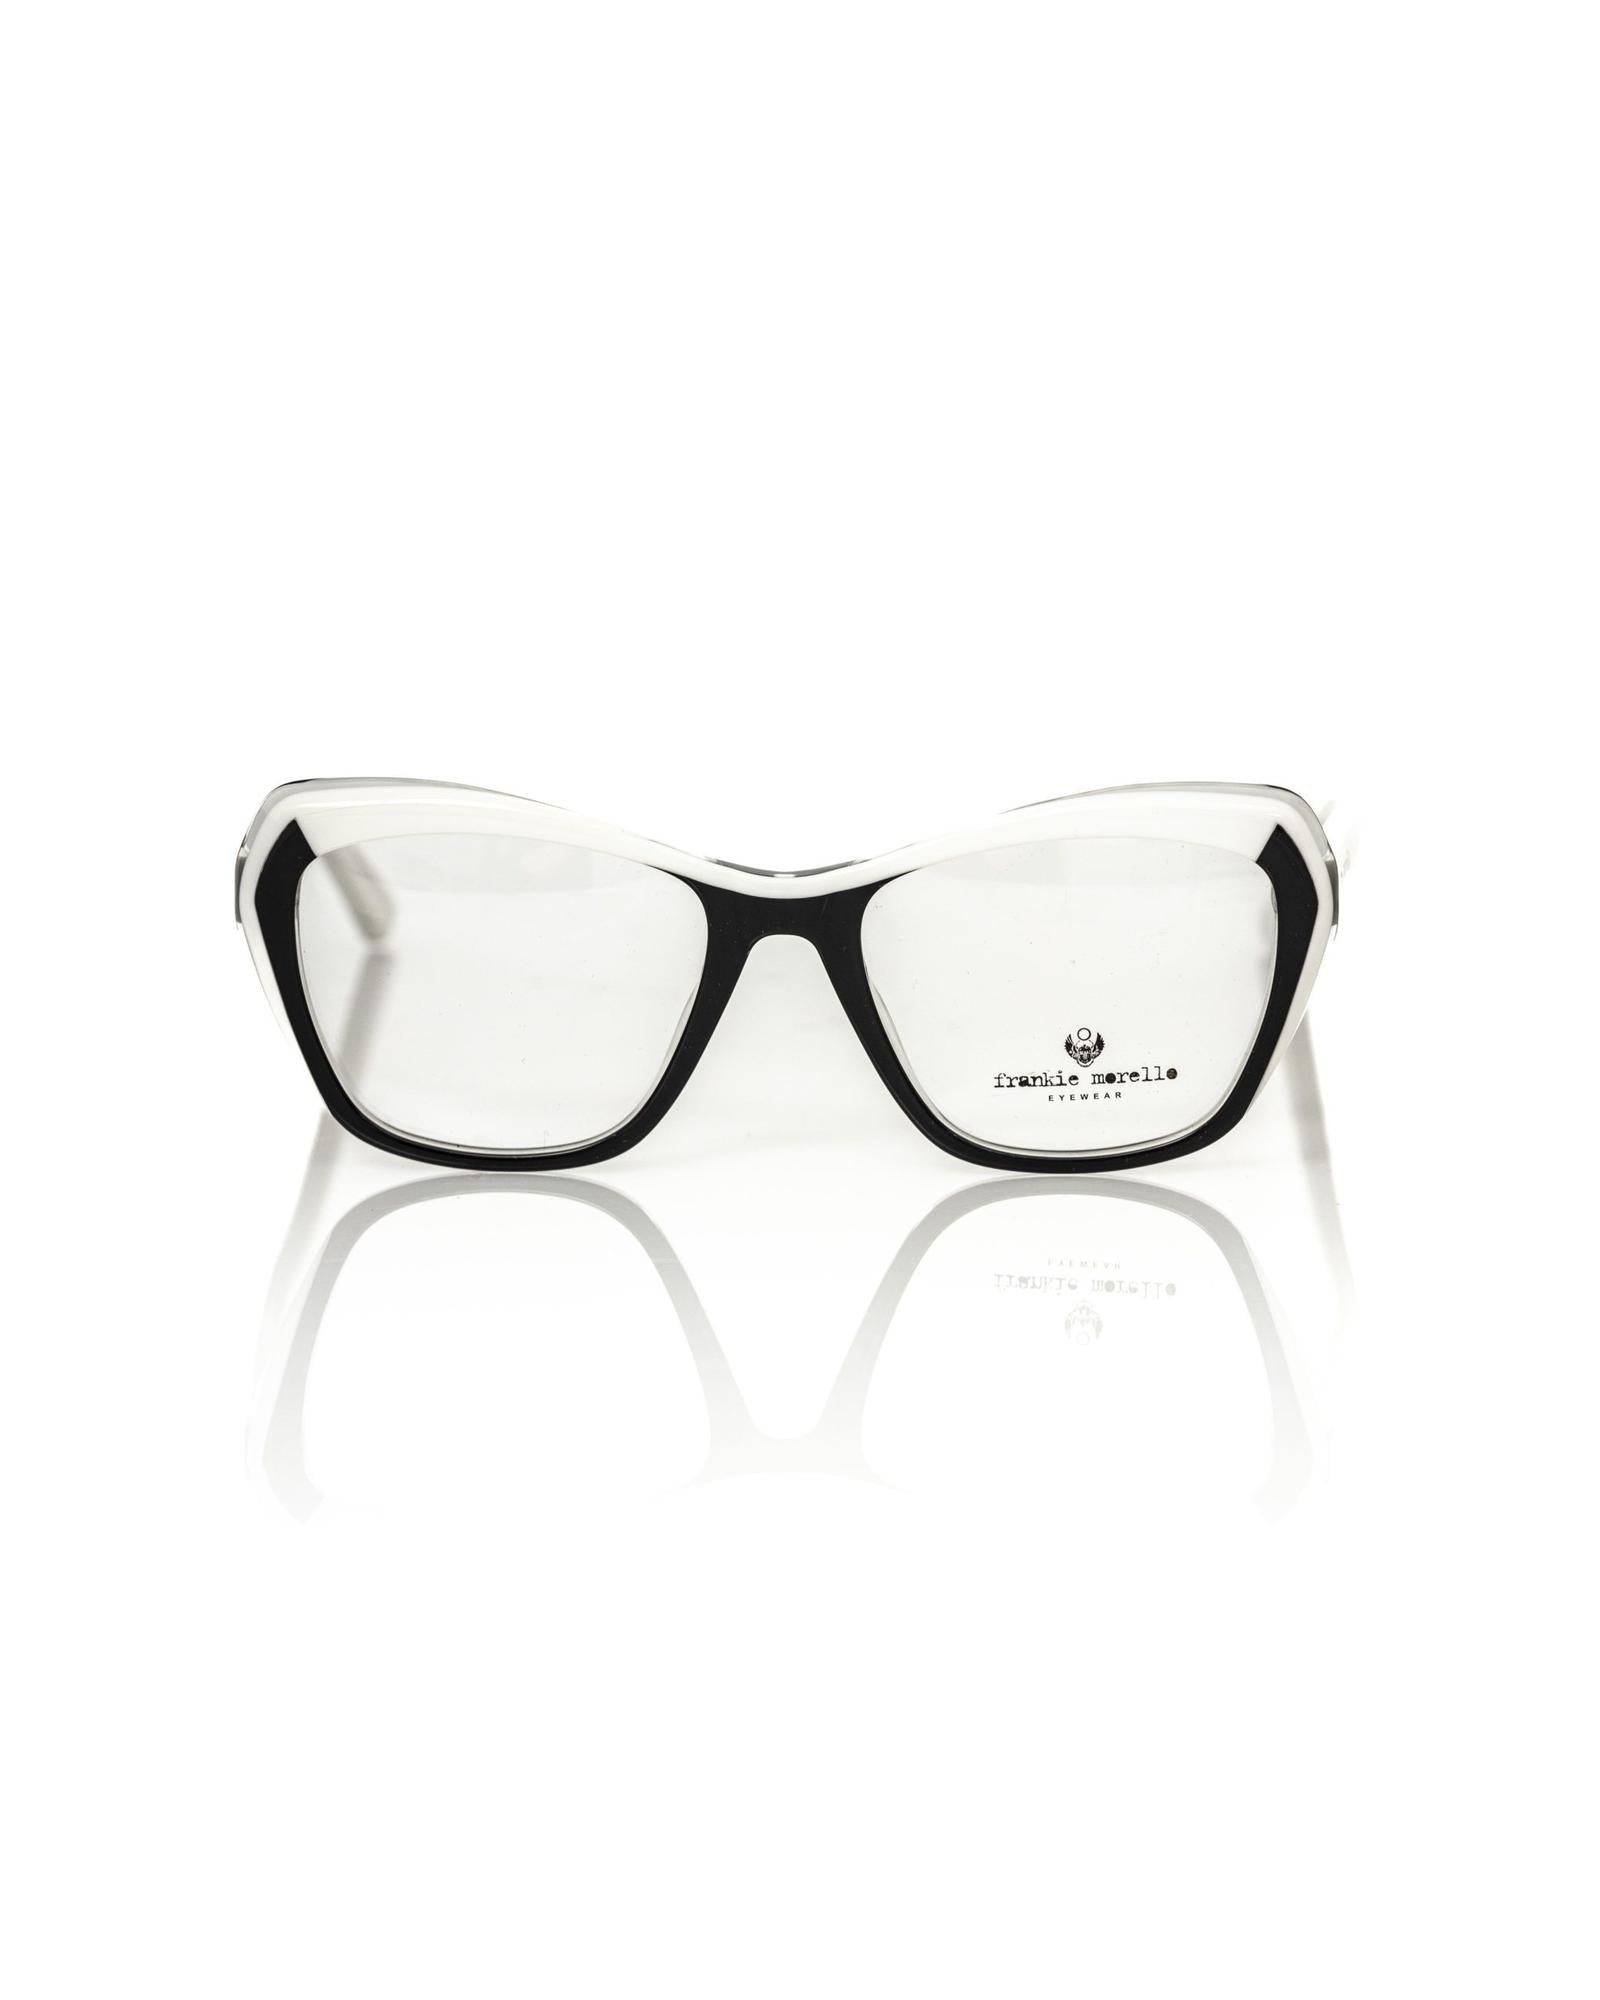 Cat Eye Eyeglasses with Black Frame and White/Transparent Profile &amp; Temples One Size Women